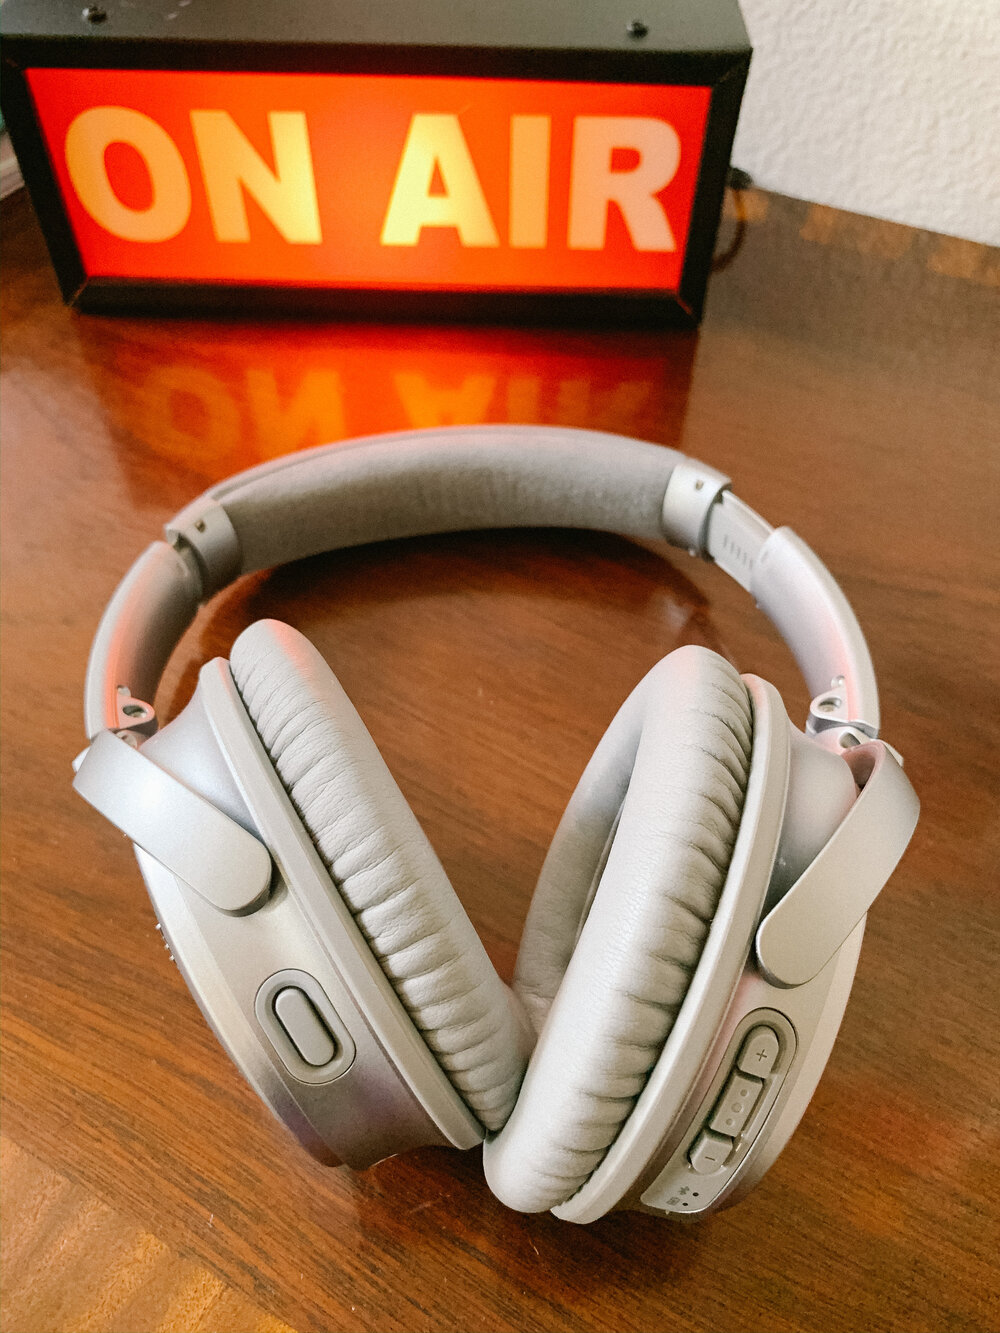 bluetooth noise canceling headphones to boost productivity and how to work from home with a significant other